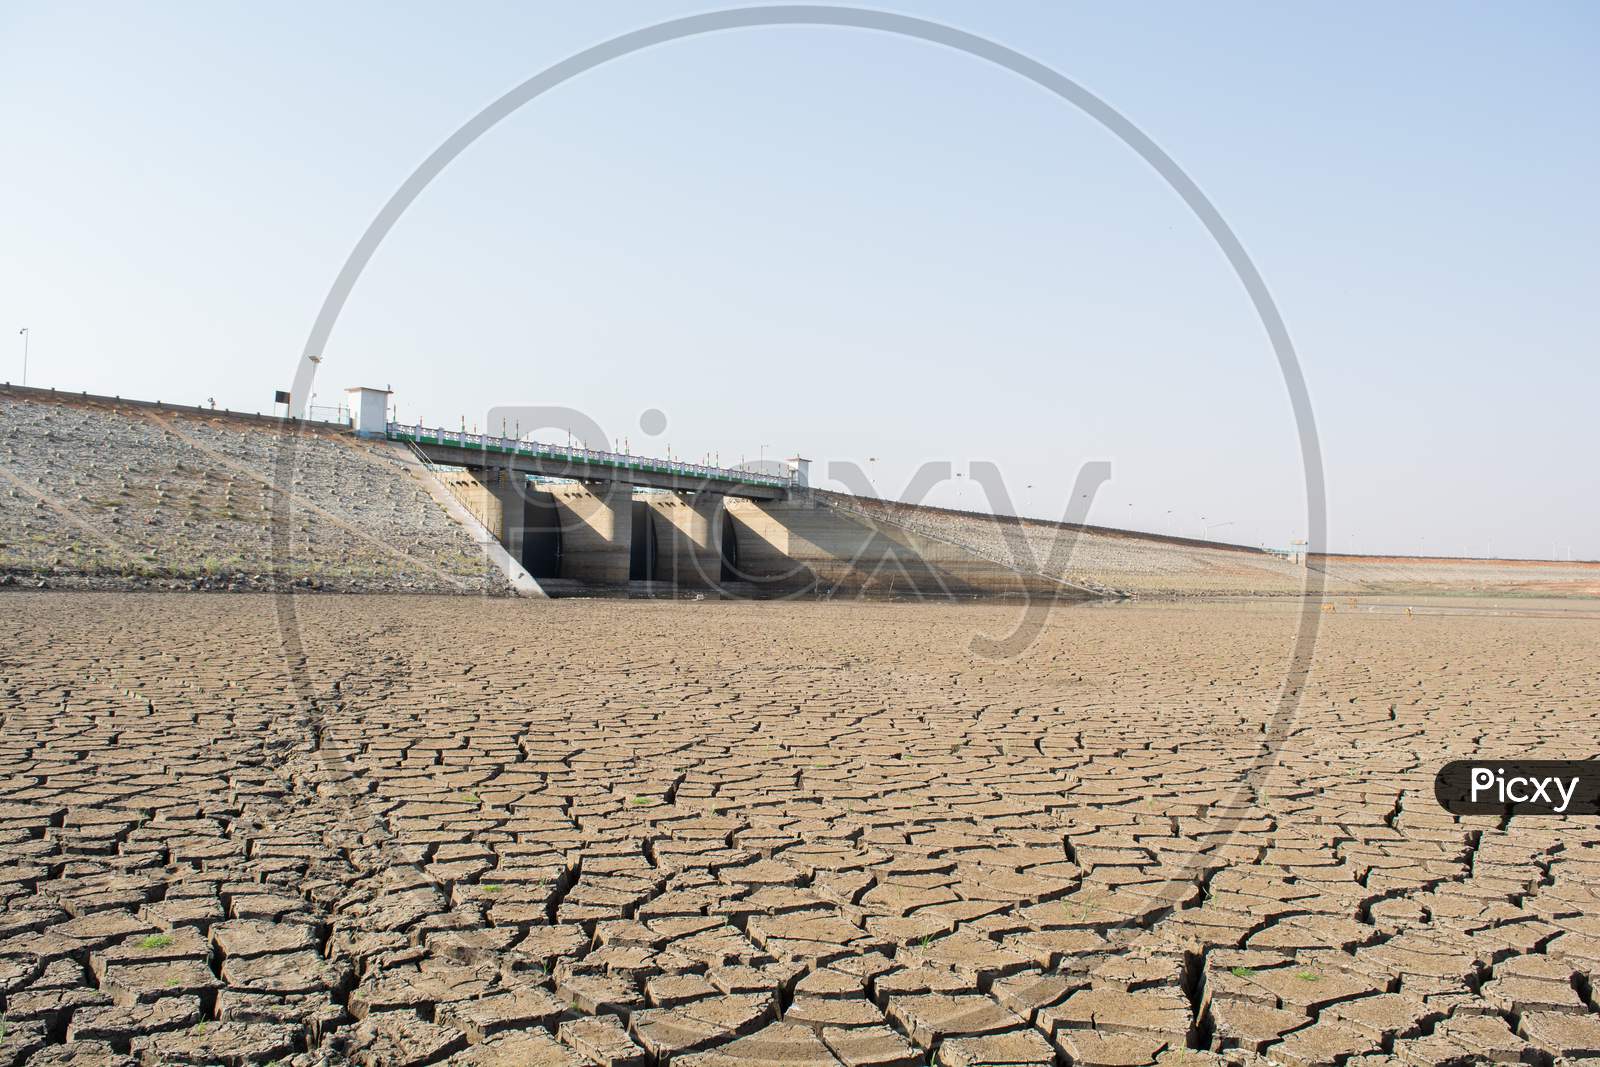 A Dried Up Empty Reservoir Or Dam During A Summer Heatwave, Low Rainfall And Drought In North Karnataka,India